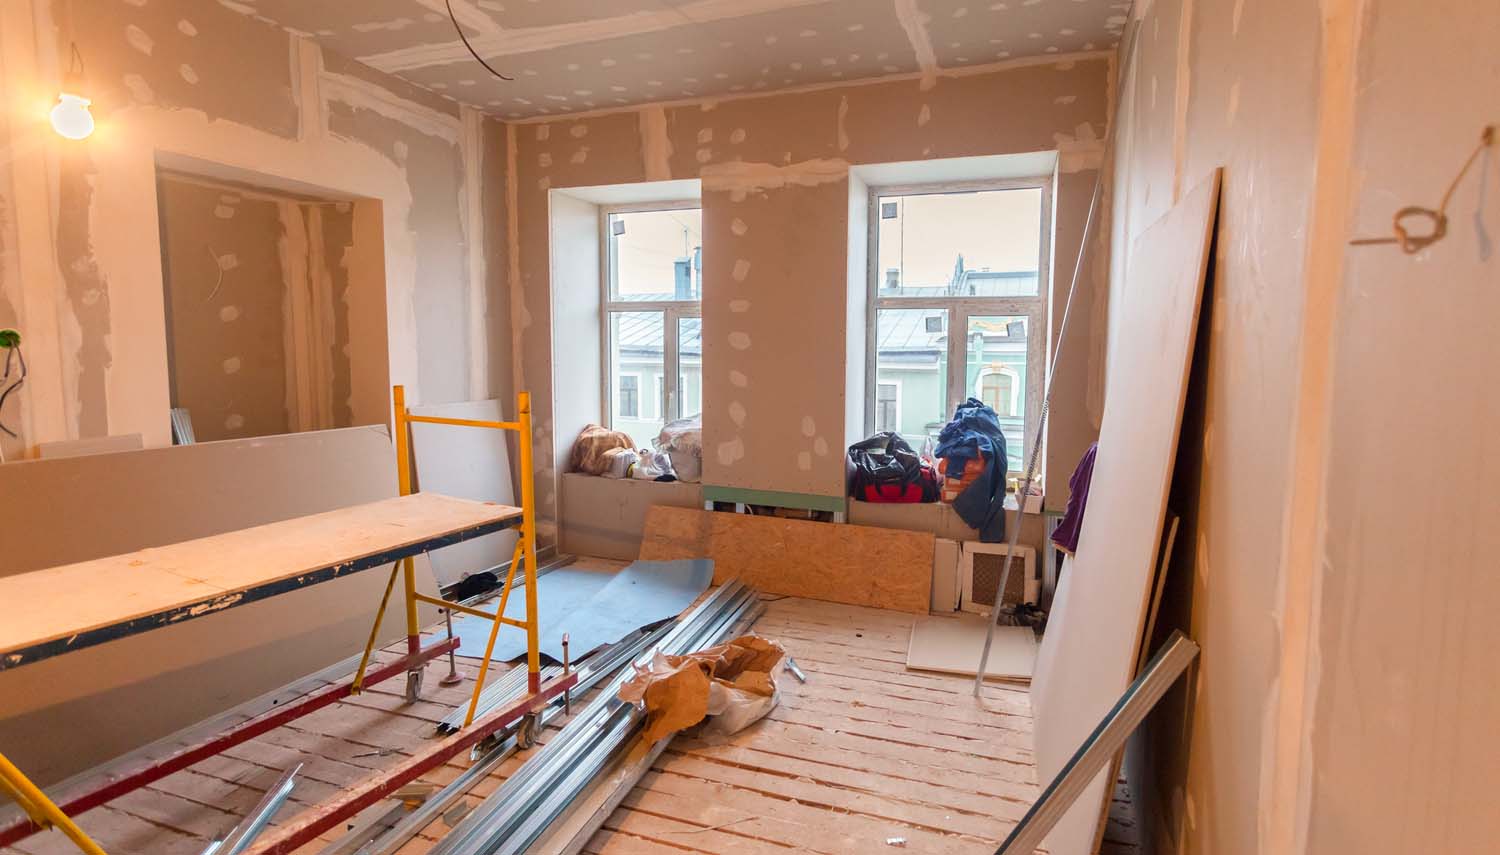 drywall installation inside a room in a home